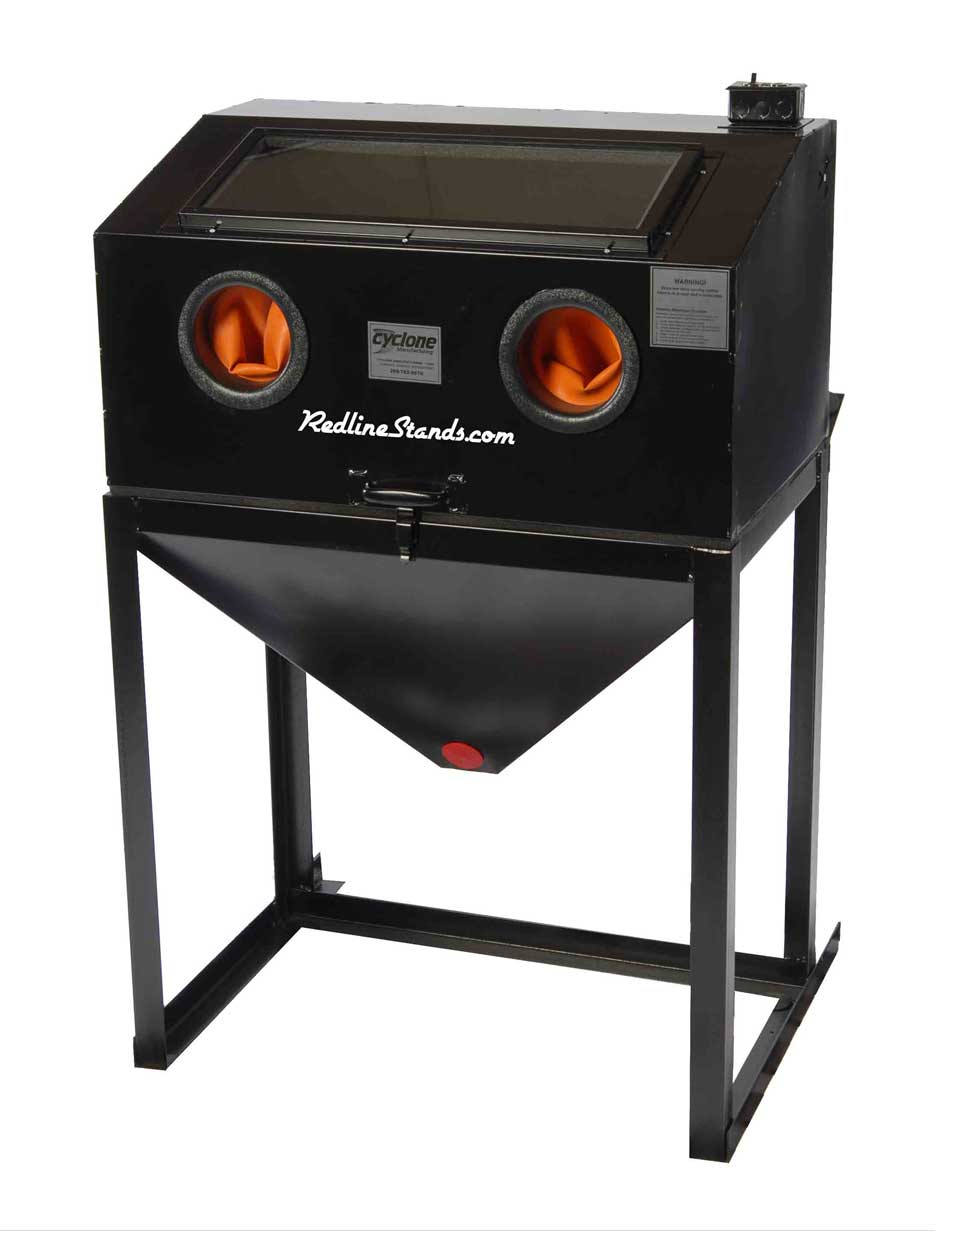 [DISCONTINUED] Cyclone #FT3522 Abrasive Sand Blasting Cabinet